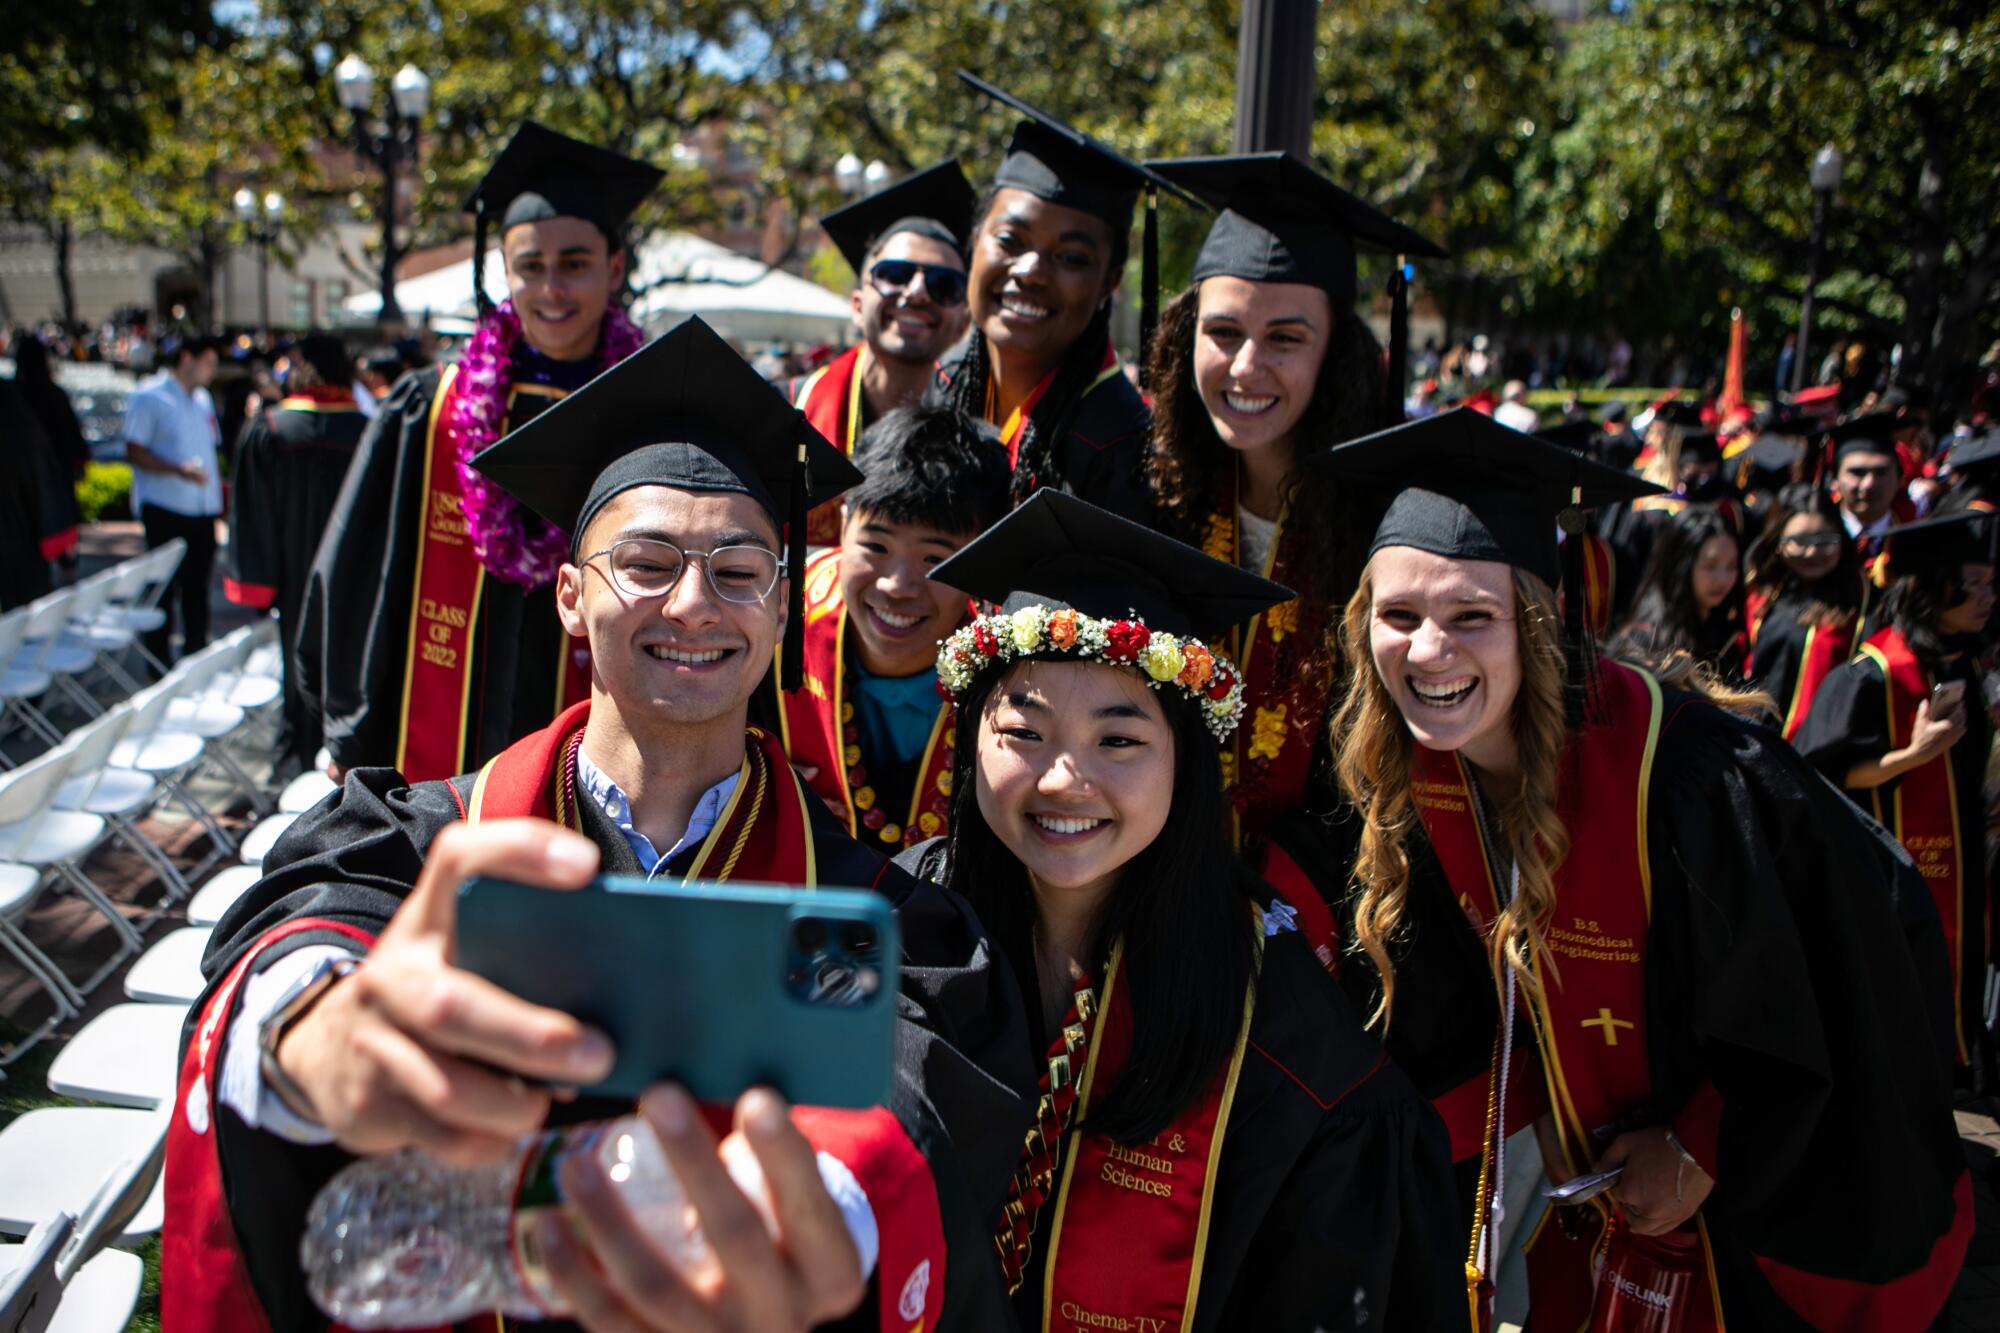 A group of grads smiles as one takes a selfie with his cellphone